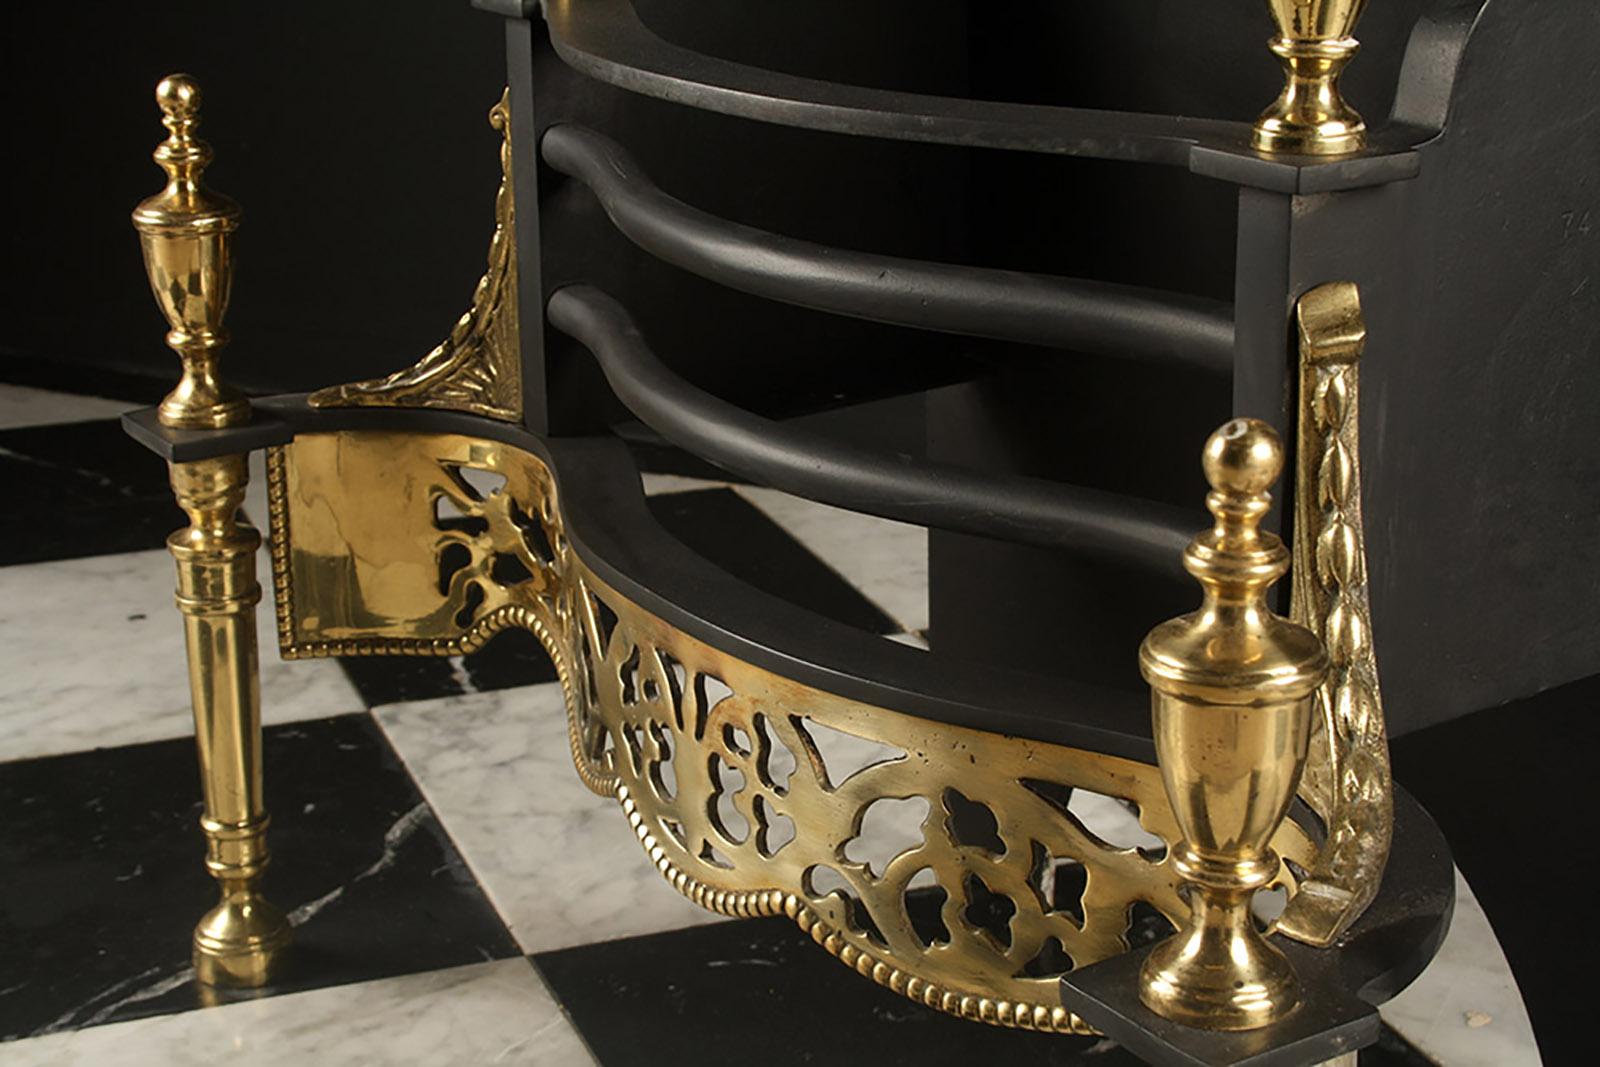 A 20th century George III Regency brass and cast iron serpentine fire grate, with an ornate foliate fret pierced apron and four urn finials, on tapered turned supports, English 20th Century.

Depth: 13 1/2? – 34.2 cm.
External height: 28? – 71